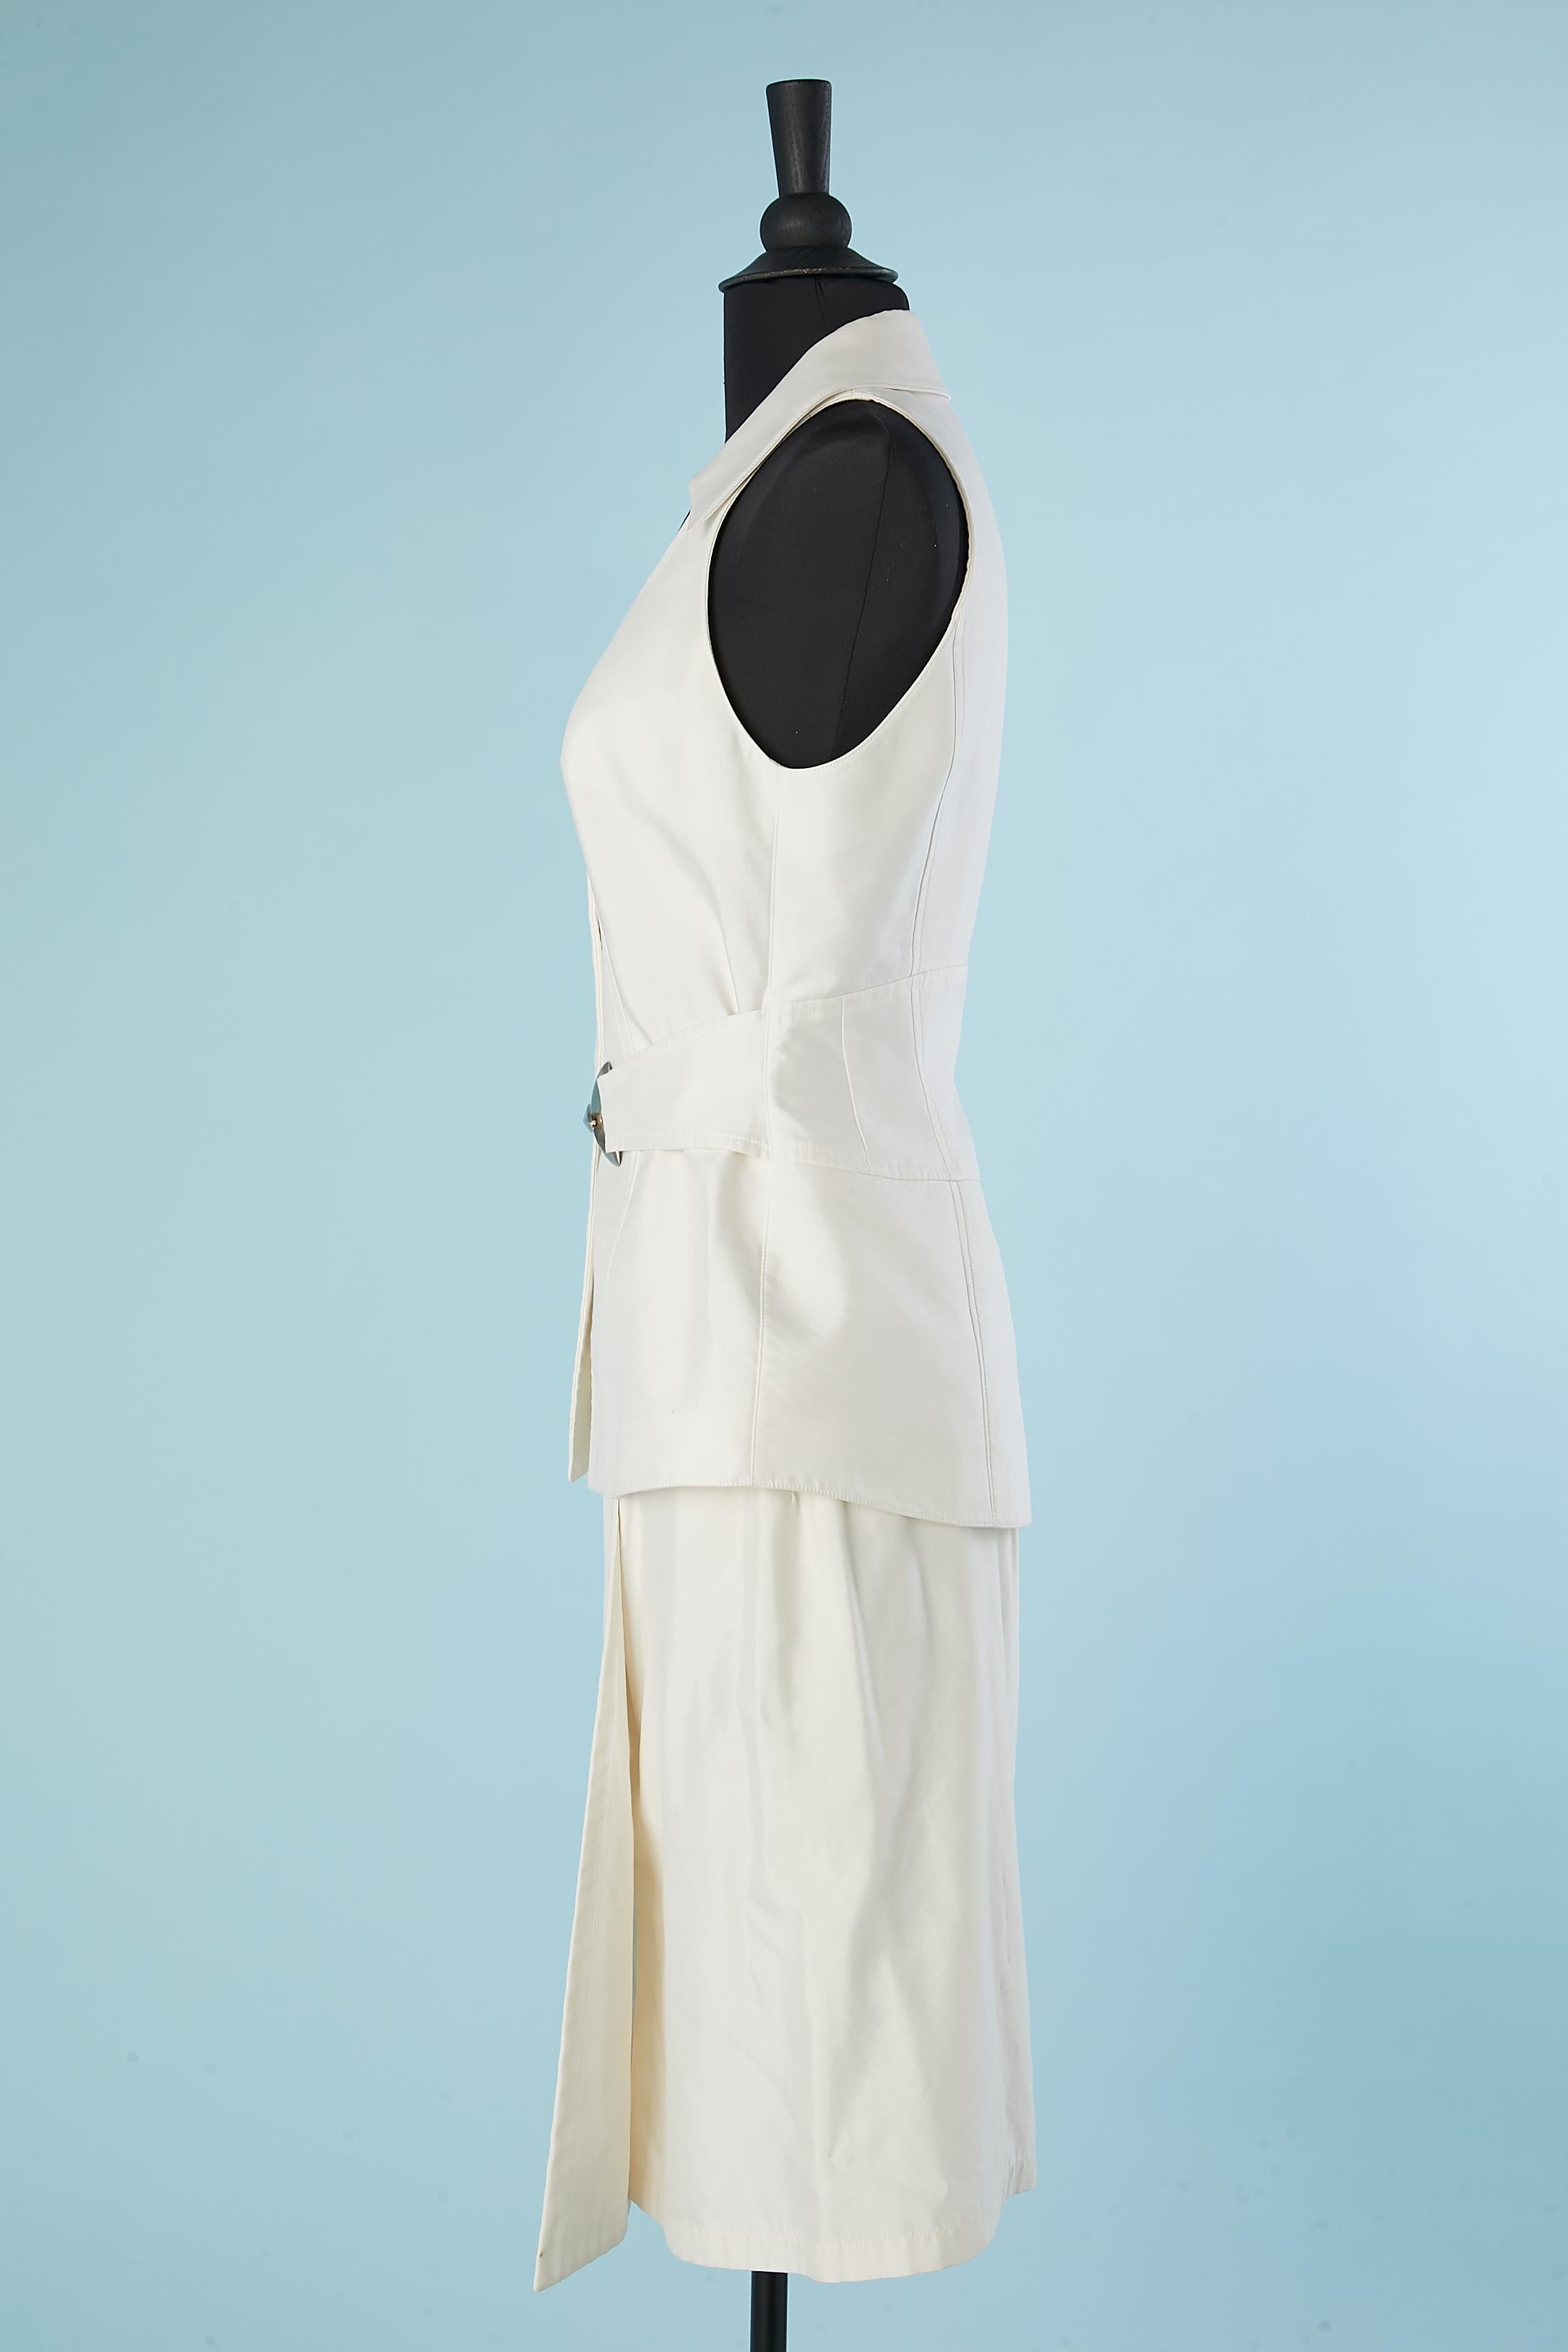 White cotton skirt and sleeveless jacket ensemble Thierry Mugler Couture  In Excellent Condition For Sale In Saint-Ouen-Sur-Seine, FR